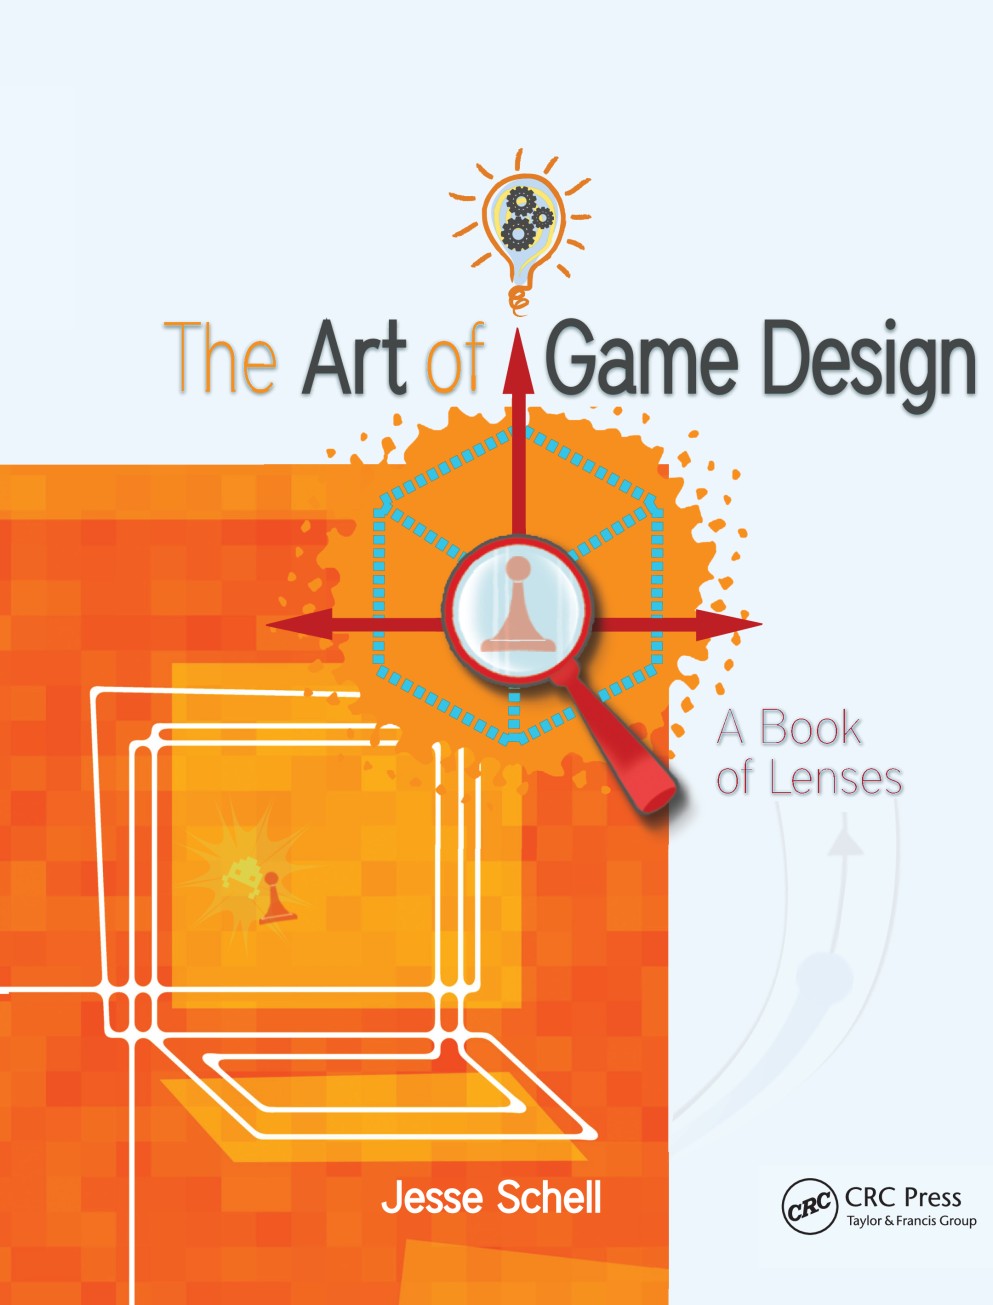 The Art of Game Design, 2nd Edition